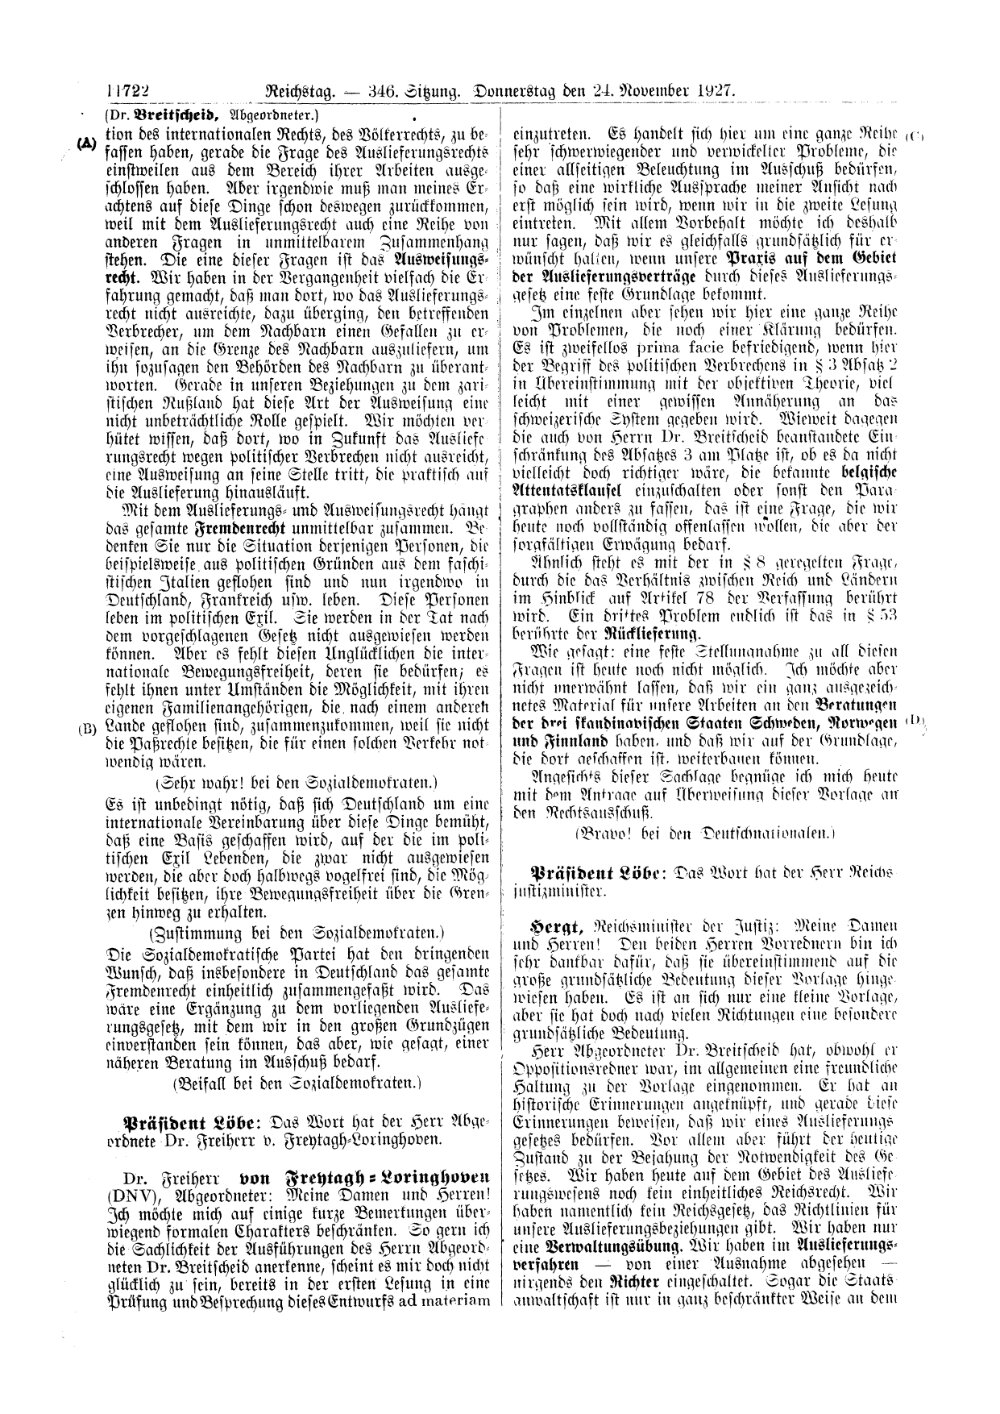 Scan of page 11722